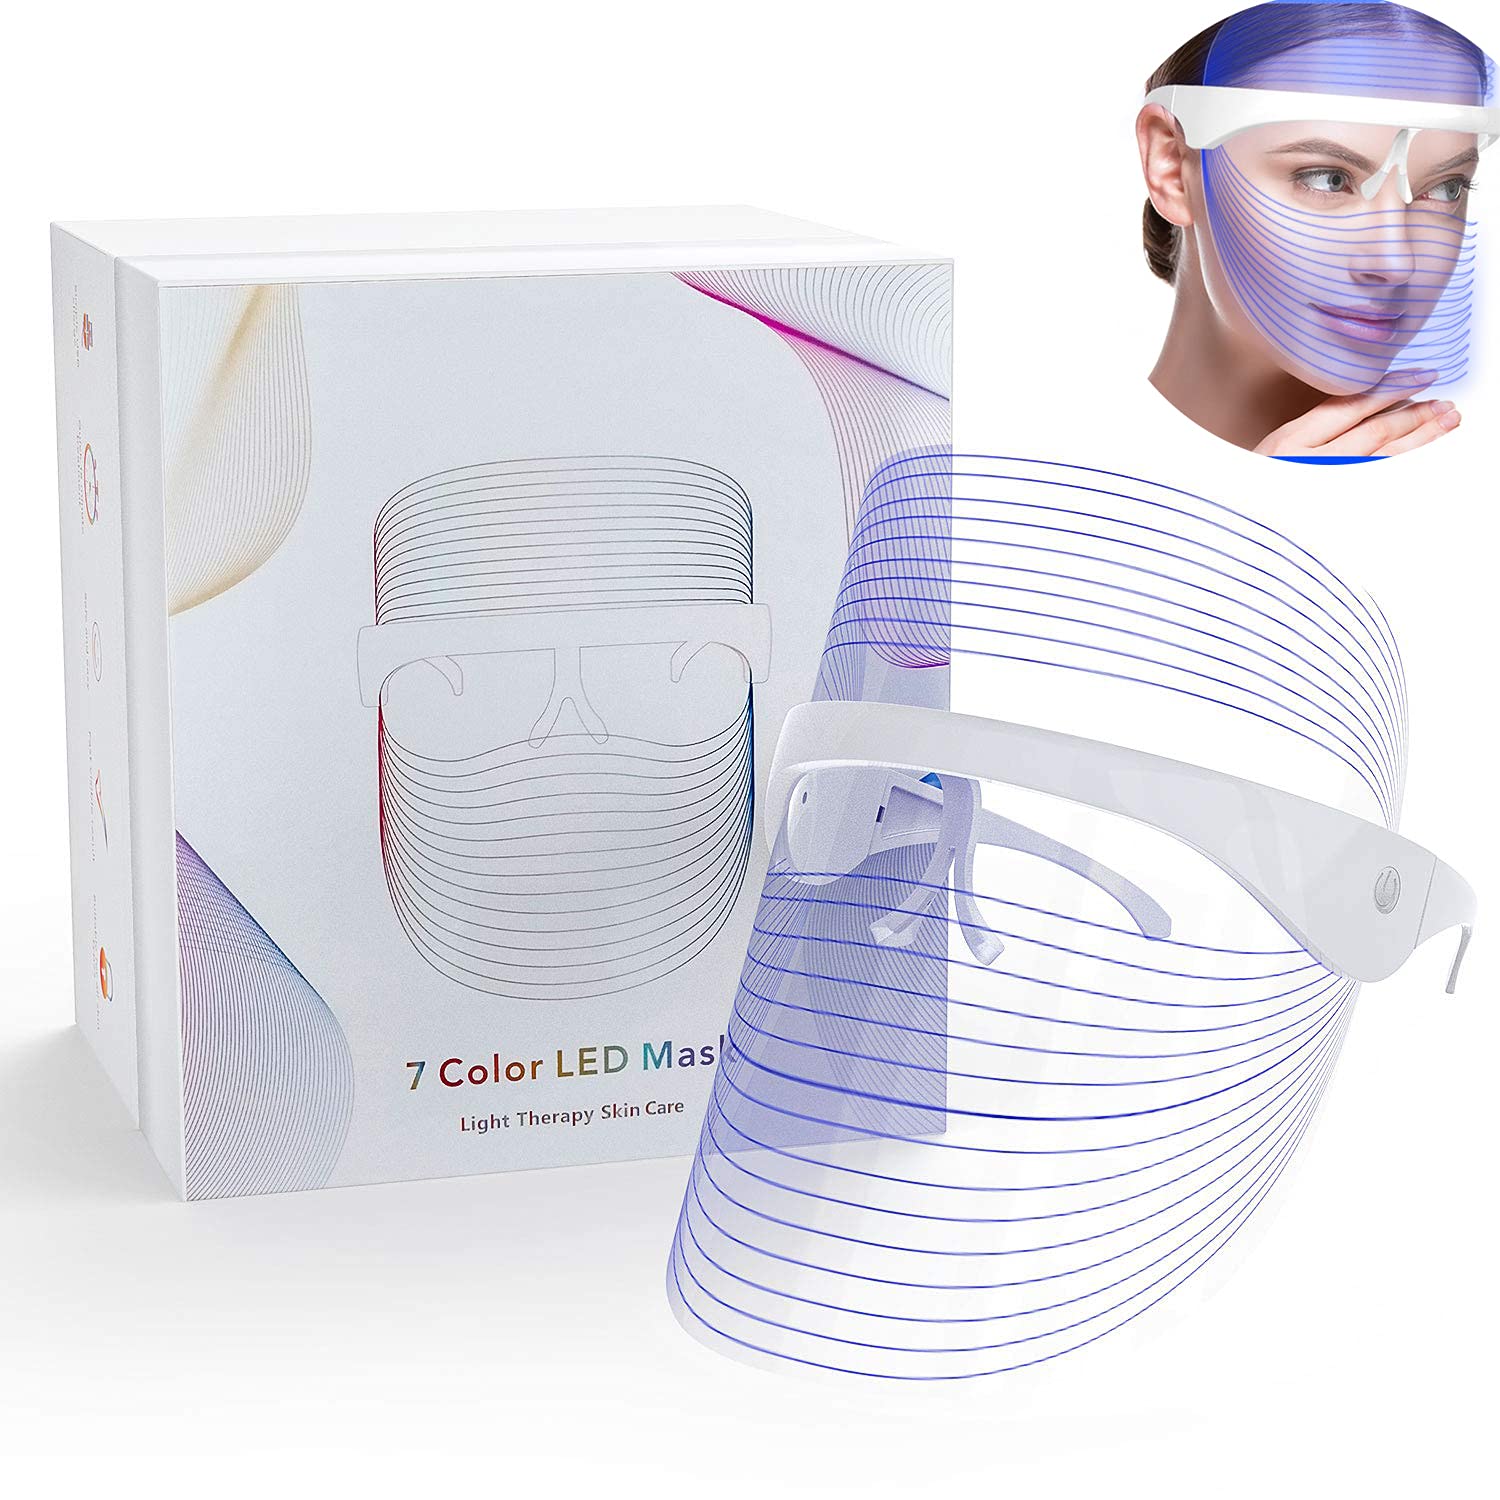 7-Colors-LED-Facial-Beauty-Mask-Photon-Therapy-Anti-Acne-Wrinkle-Removal-Skin-Rejuvenation-Face-Skin